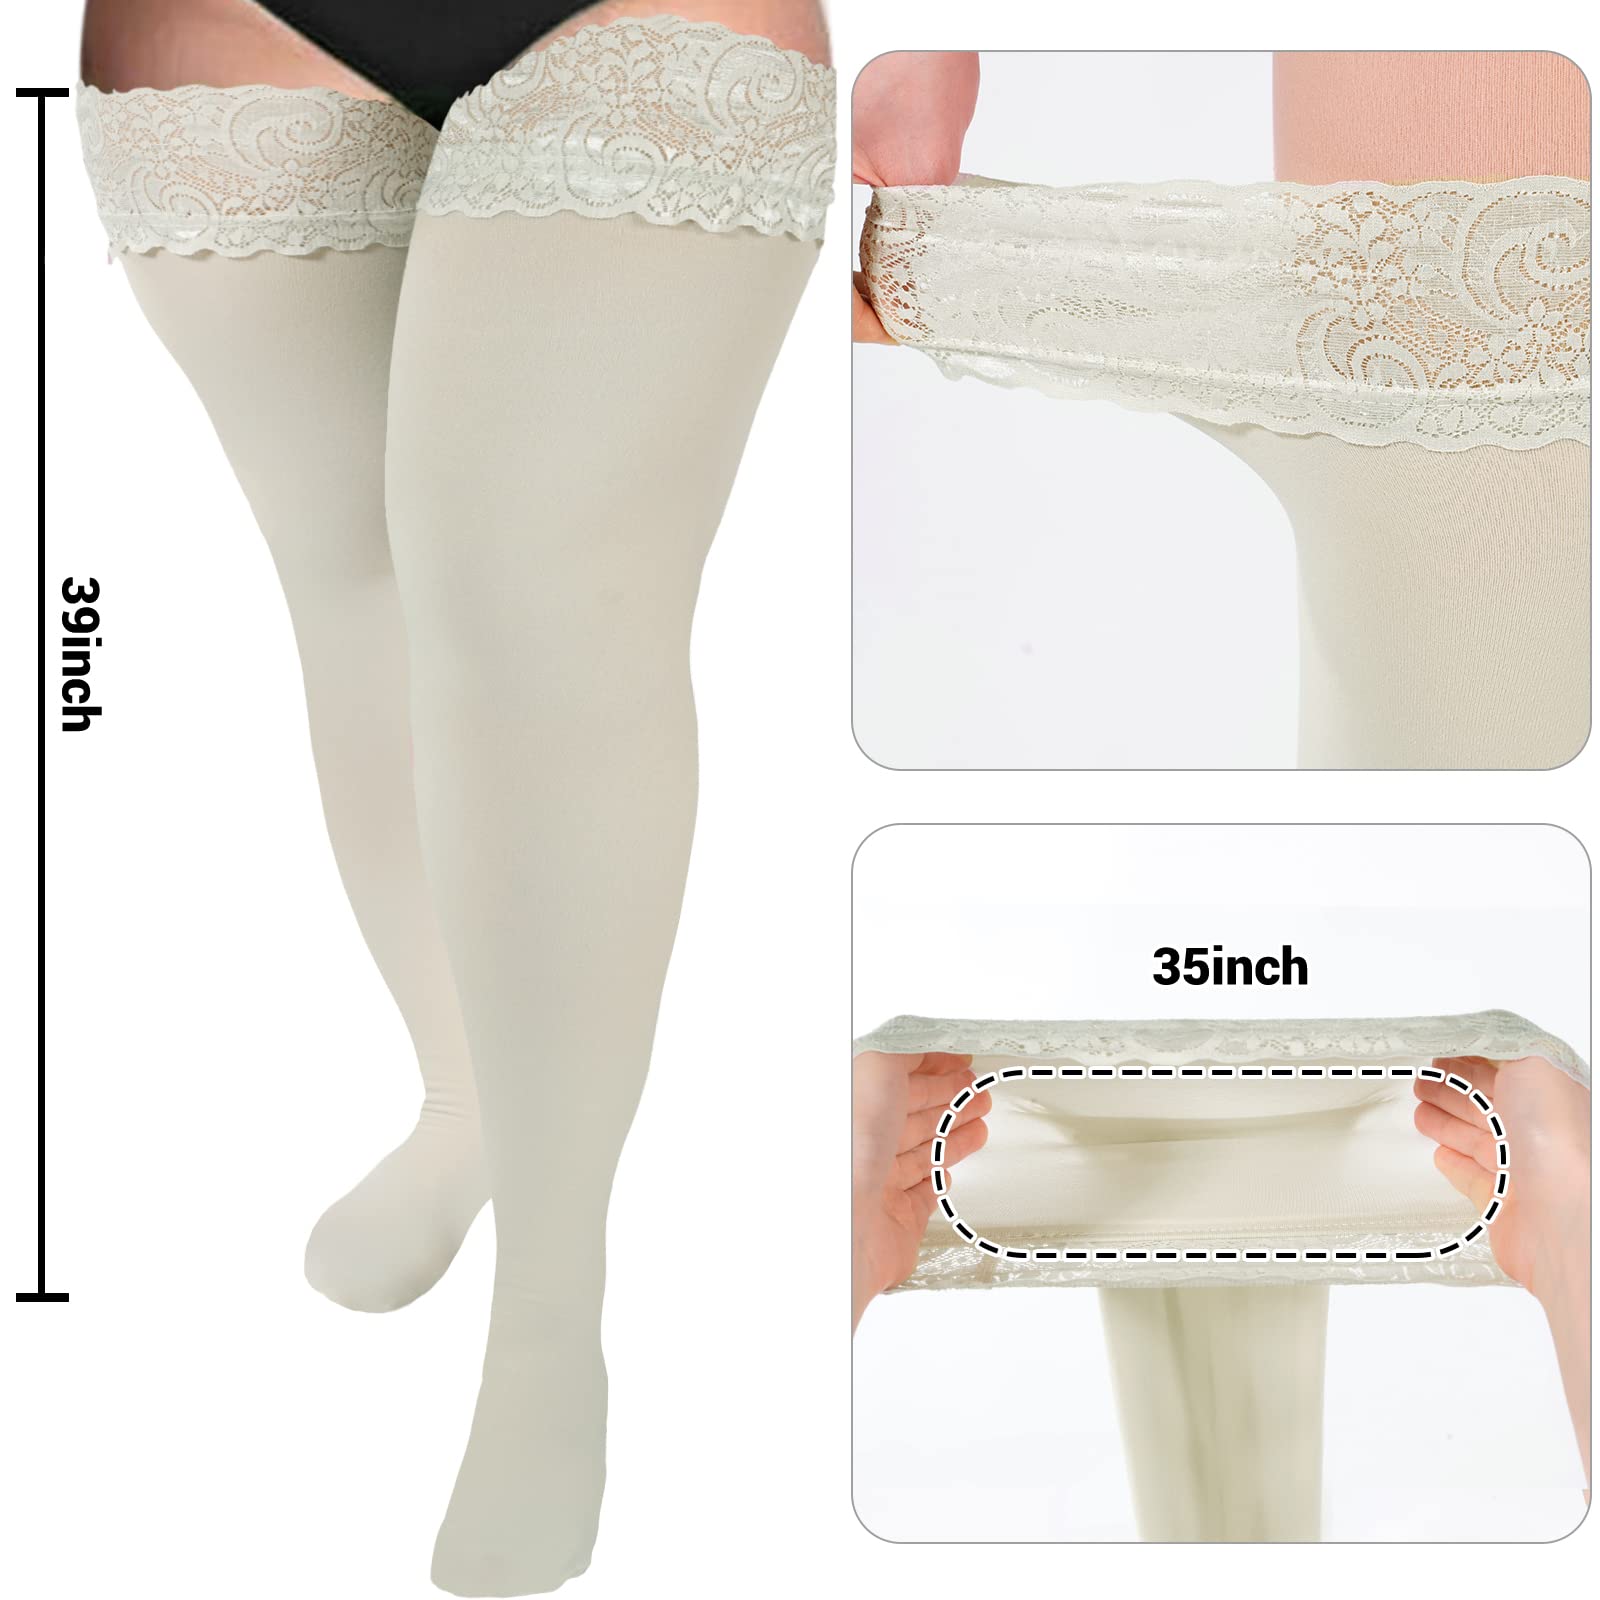 55D Semi Sheer Silicone Lace Stay Up Thigh Highs Pantyhose-Light Grey - Moon Wood